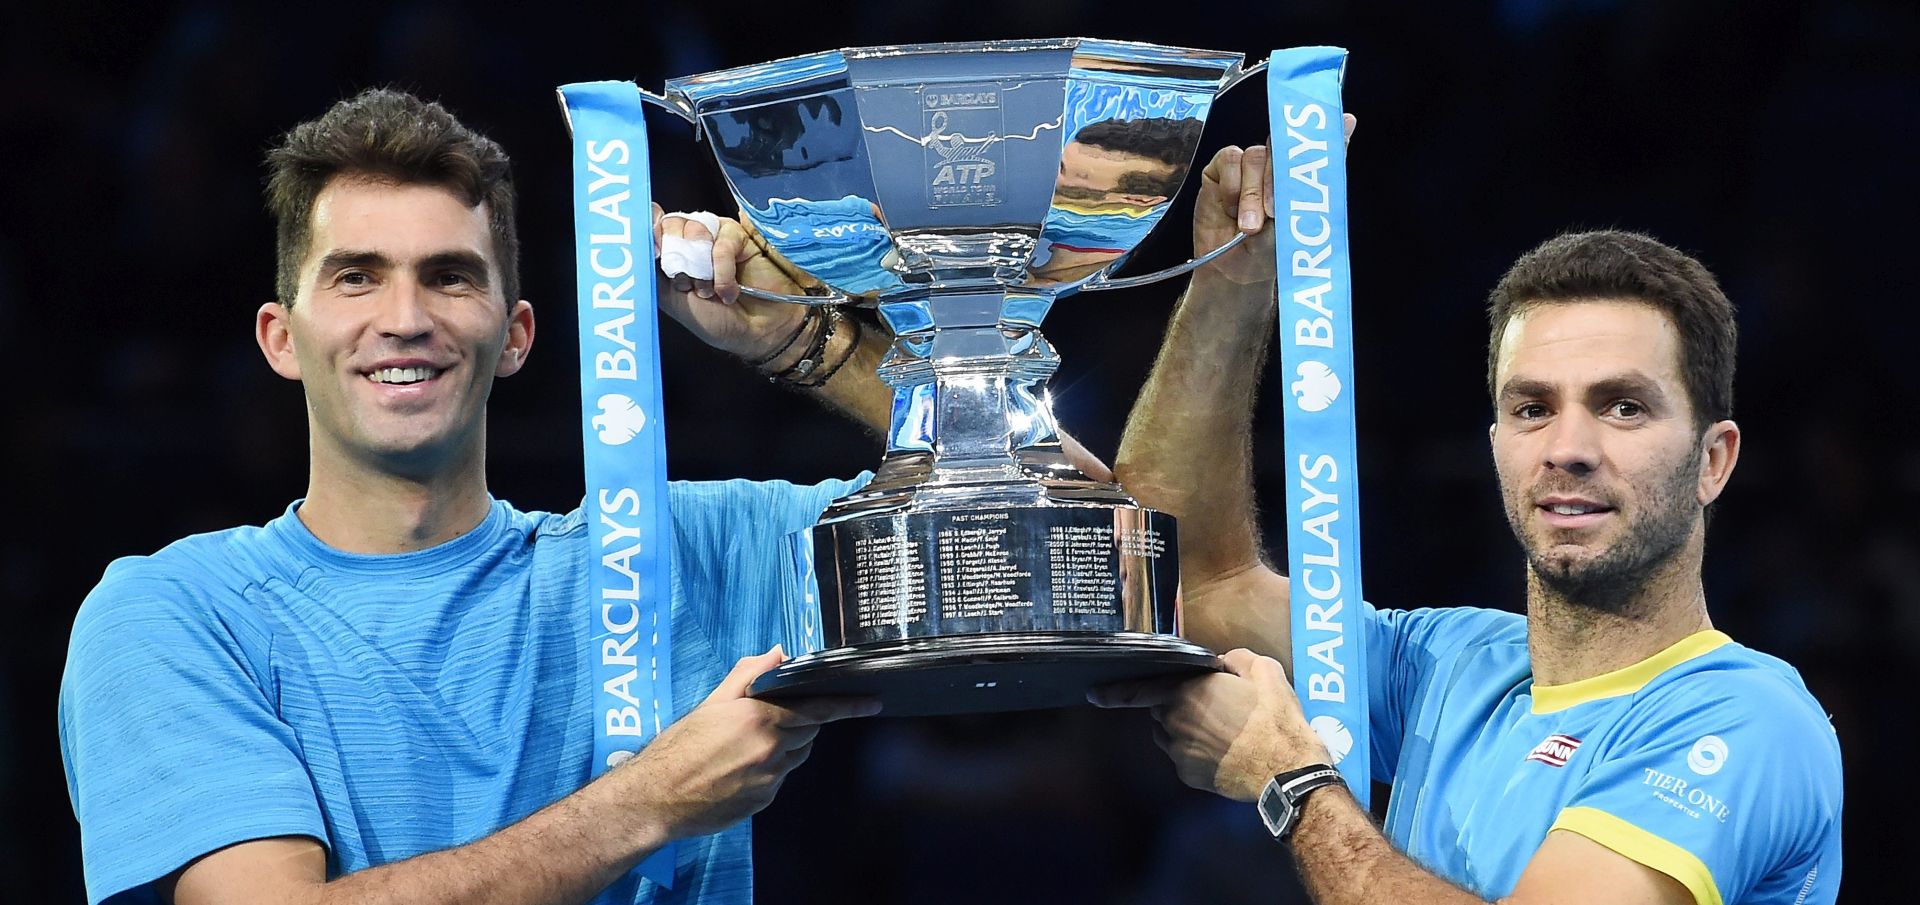 epa05037495 Horia Tecau (L) celebrates with doubles partner Jean-Julien Rojer (R) after winning the doubles final match at the ATP Tour tennis finals tournament at the O2 Arena in London, Britain, 22 November 2015.  EPA/ANDY RAIN